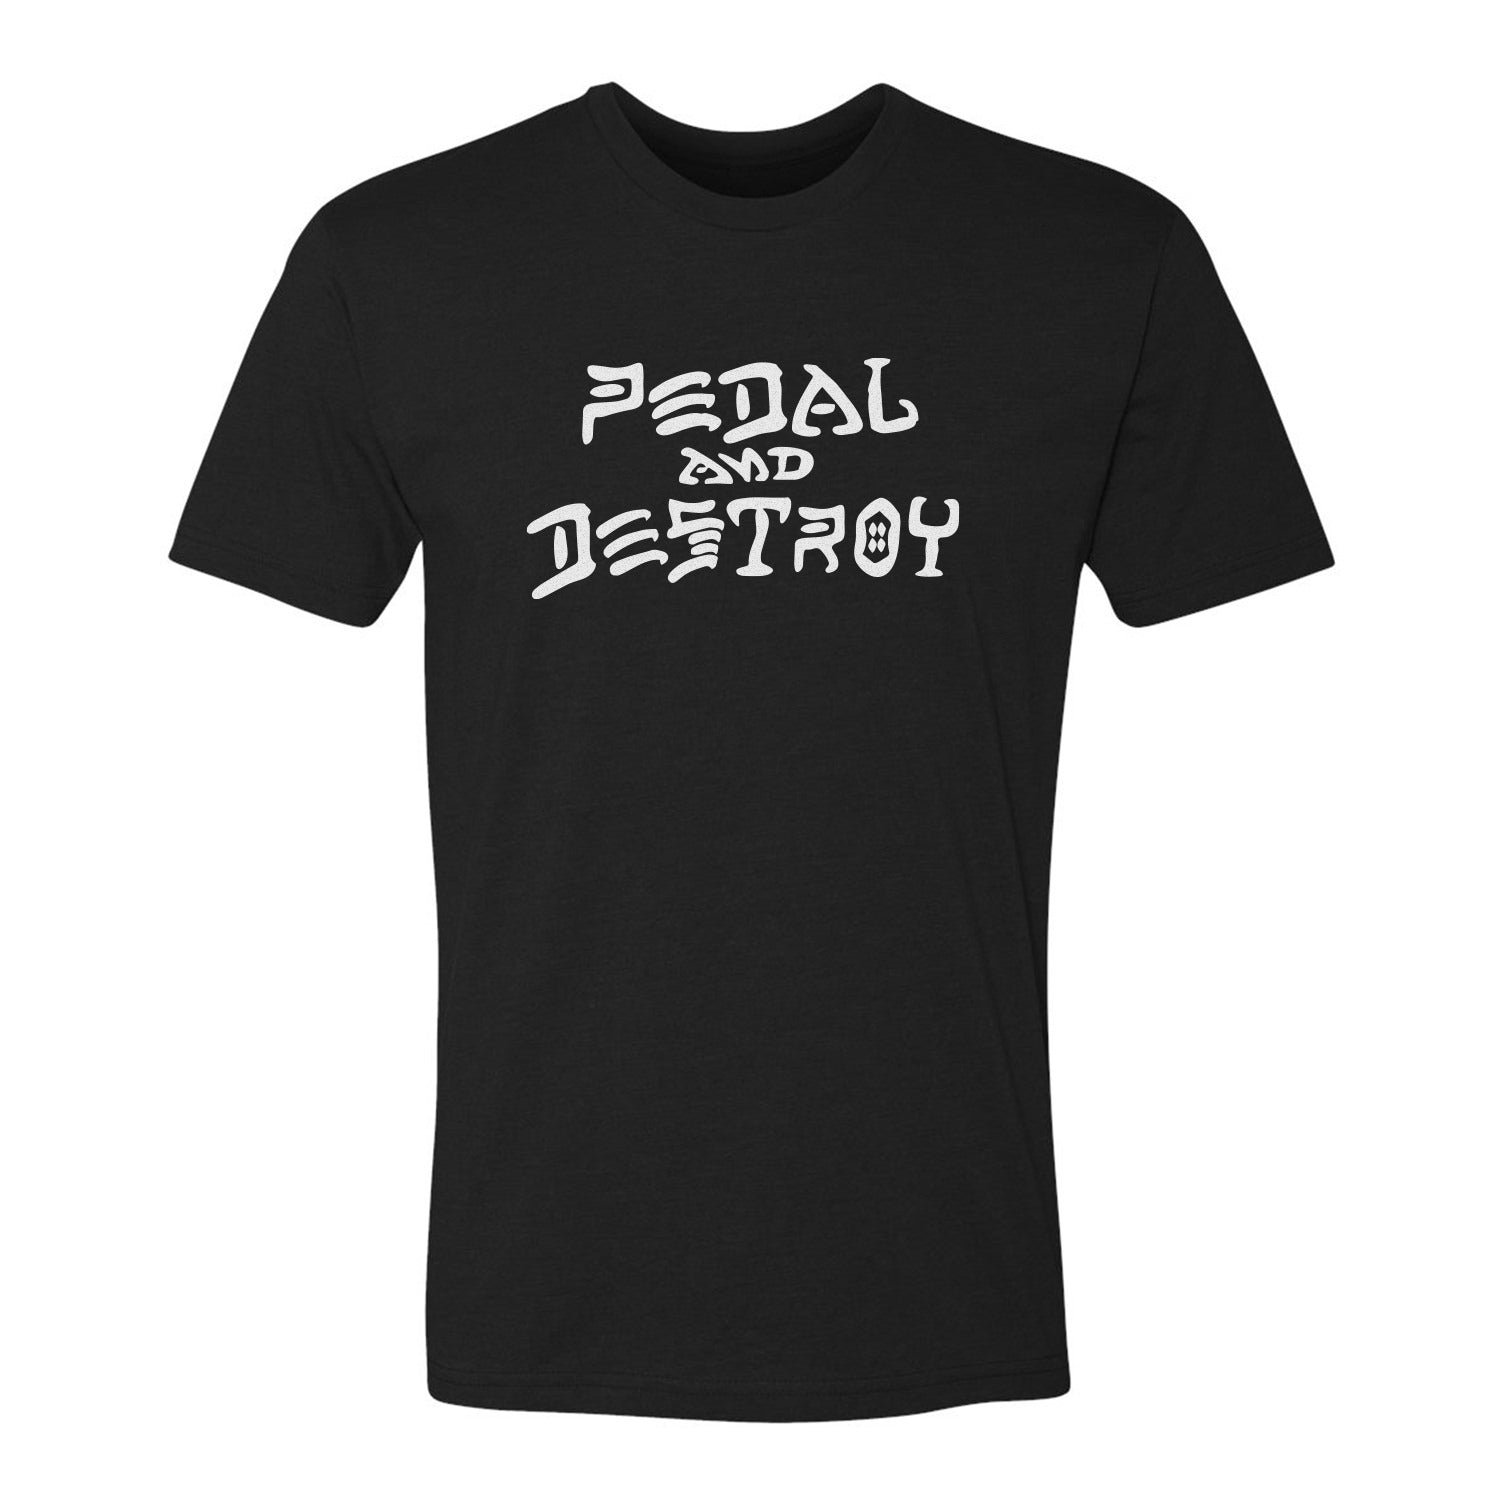 Versus Tires Pedal and Destroy short sleeve t shirt